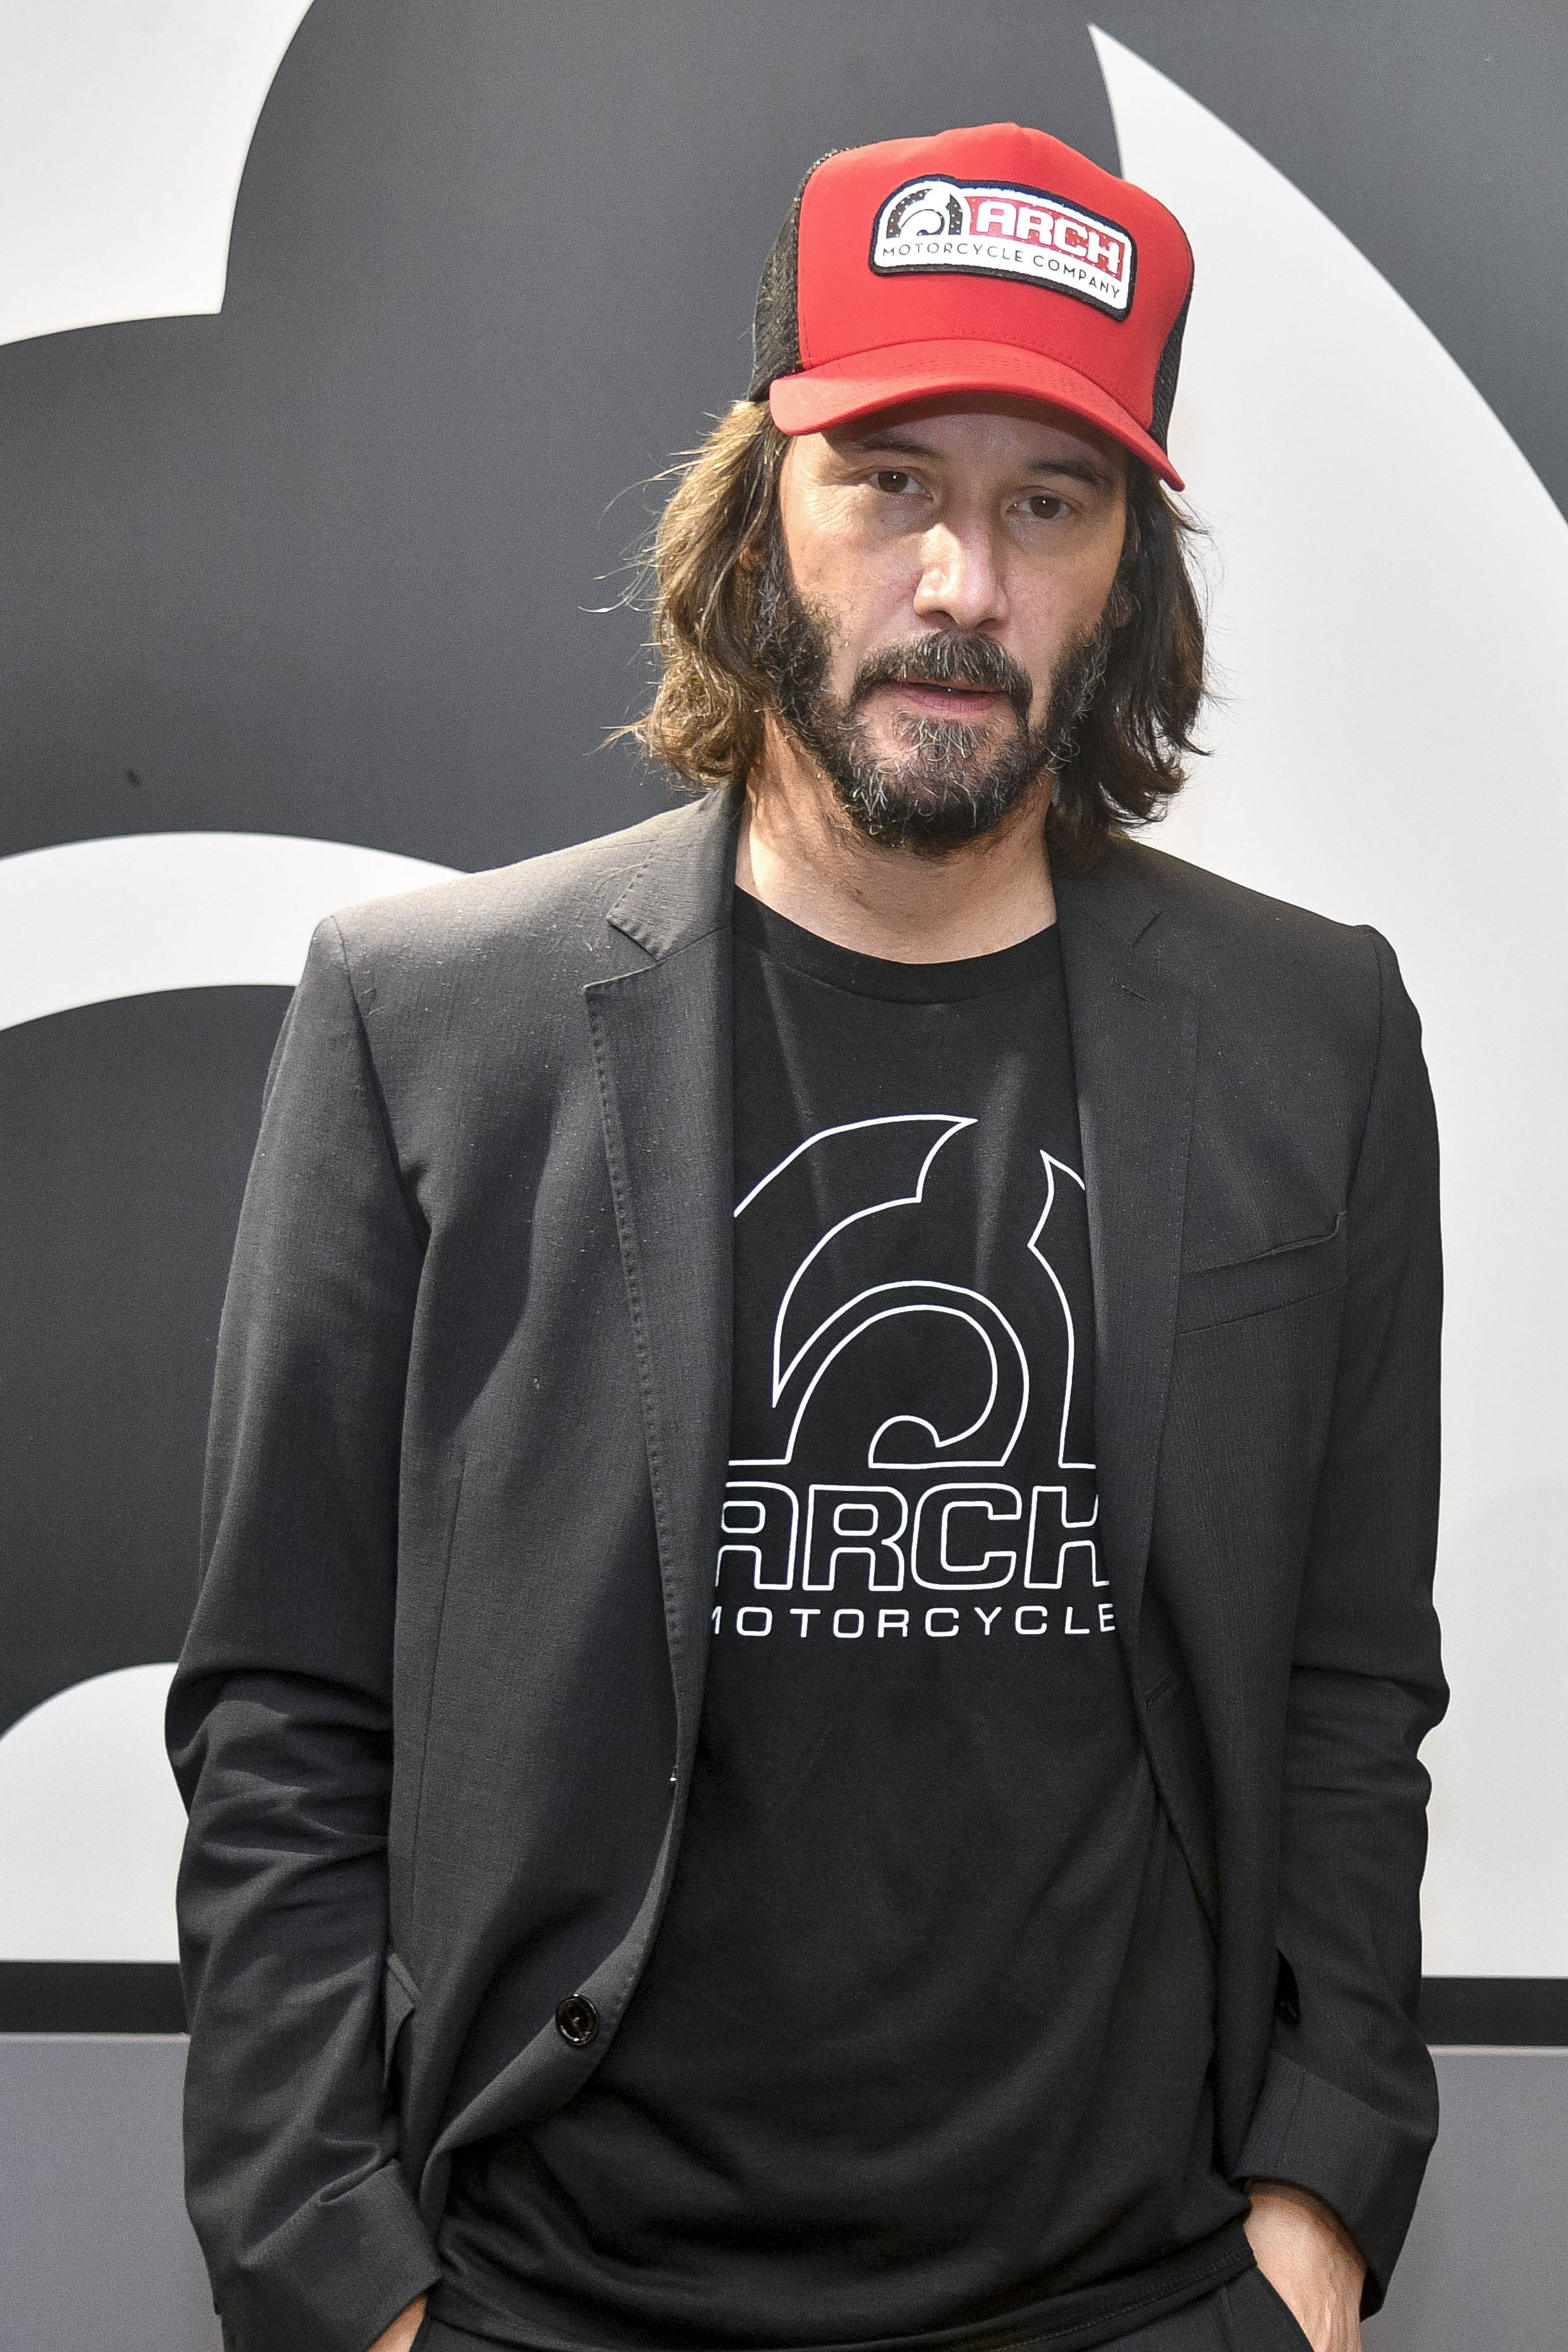 Keanu Reeves' Transformation Through the Years Then and Now Photos